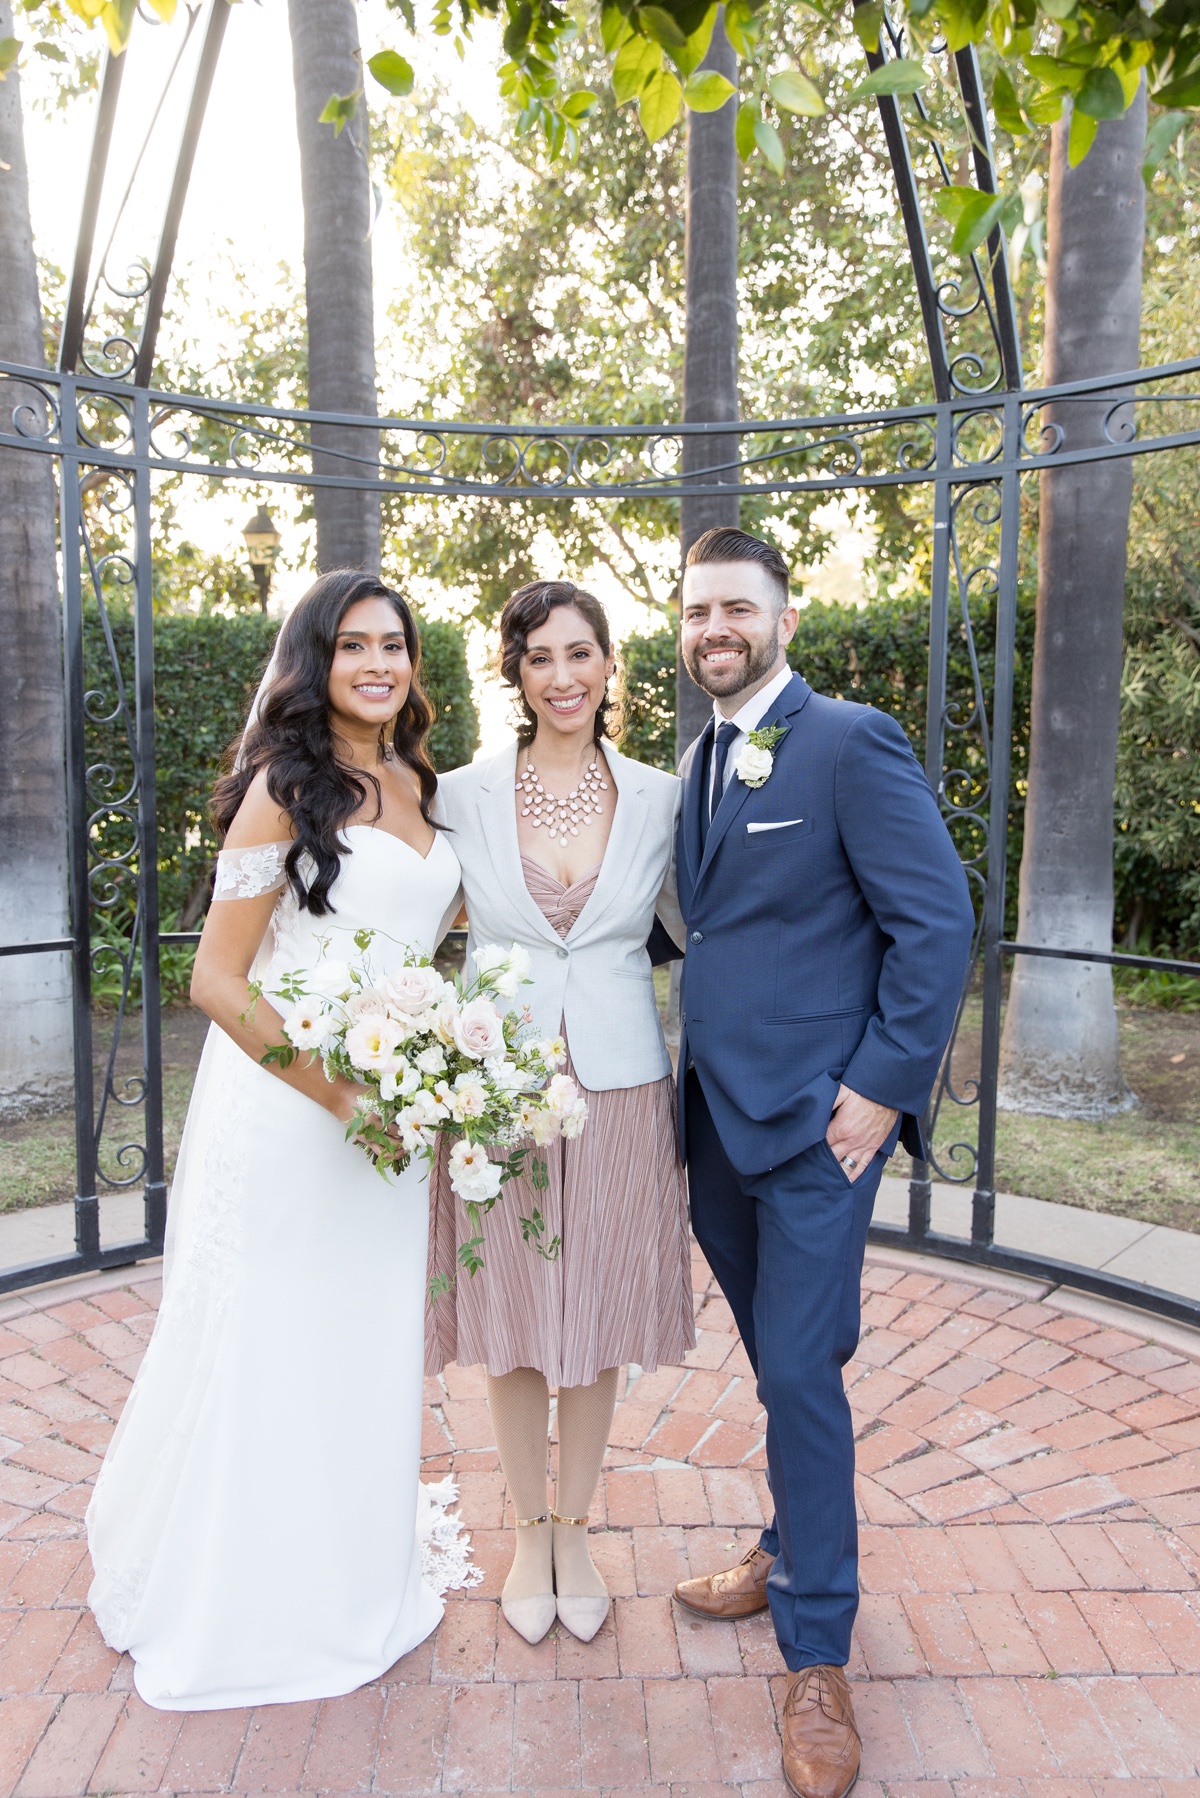 orange county wedding officiant from weddings royale